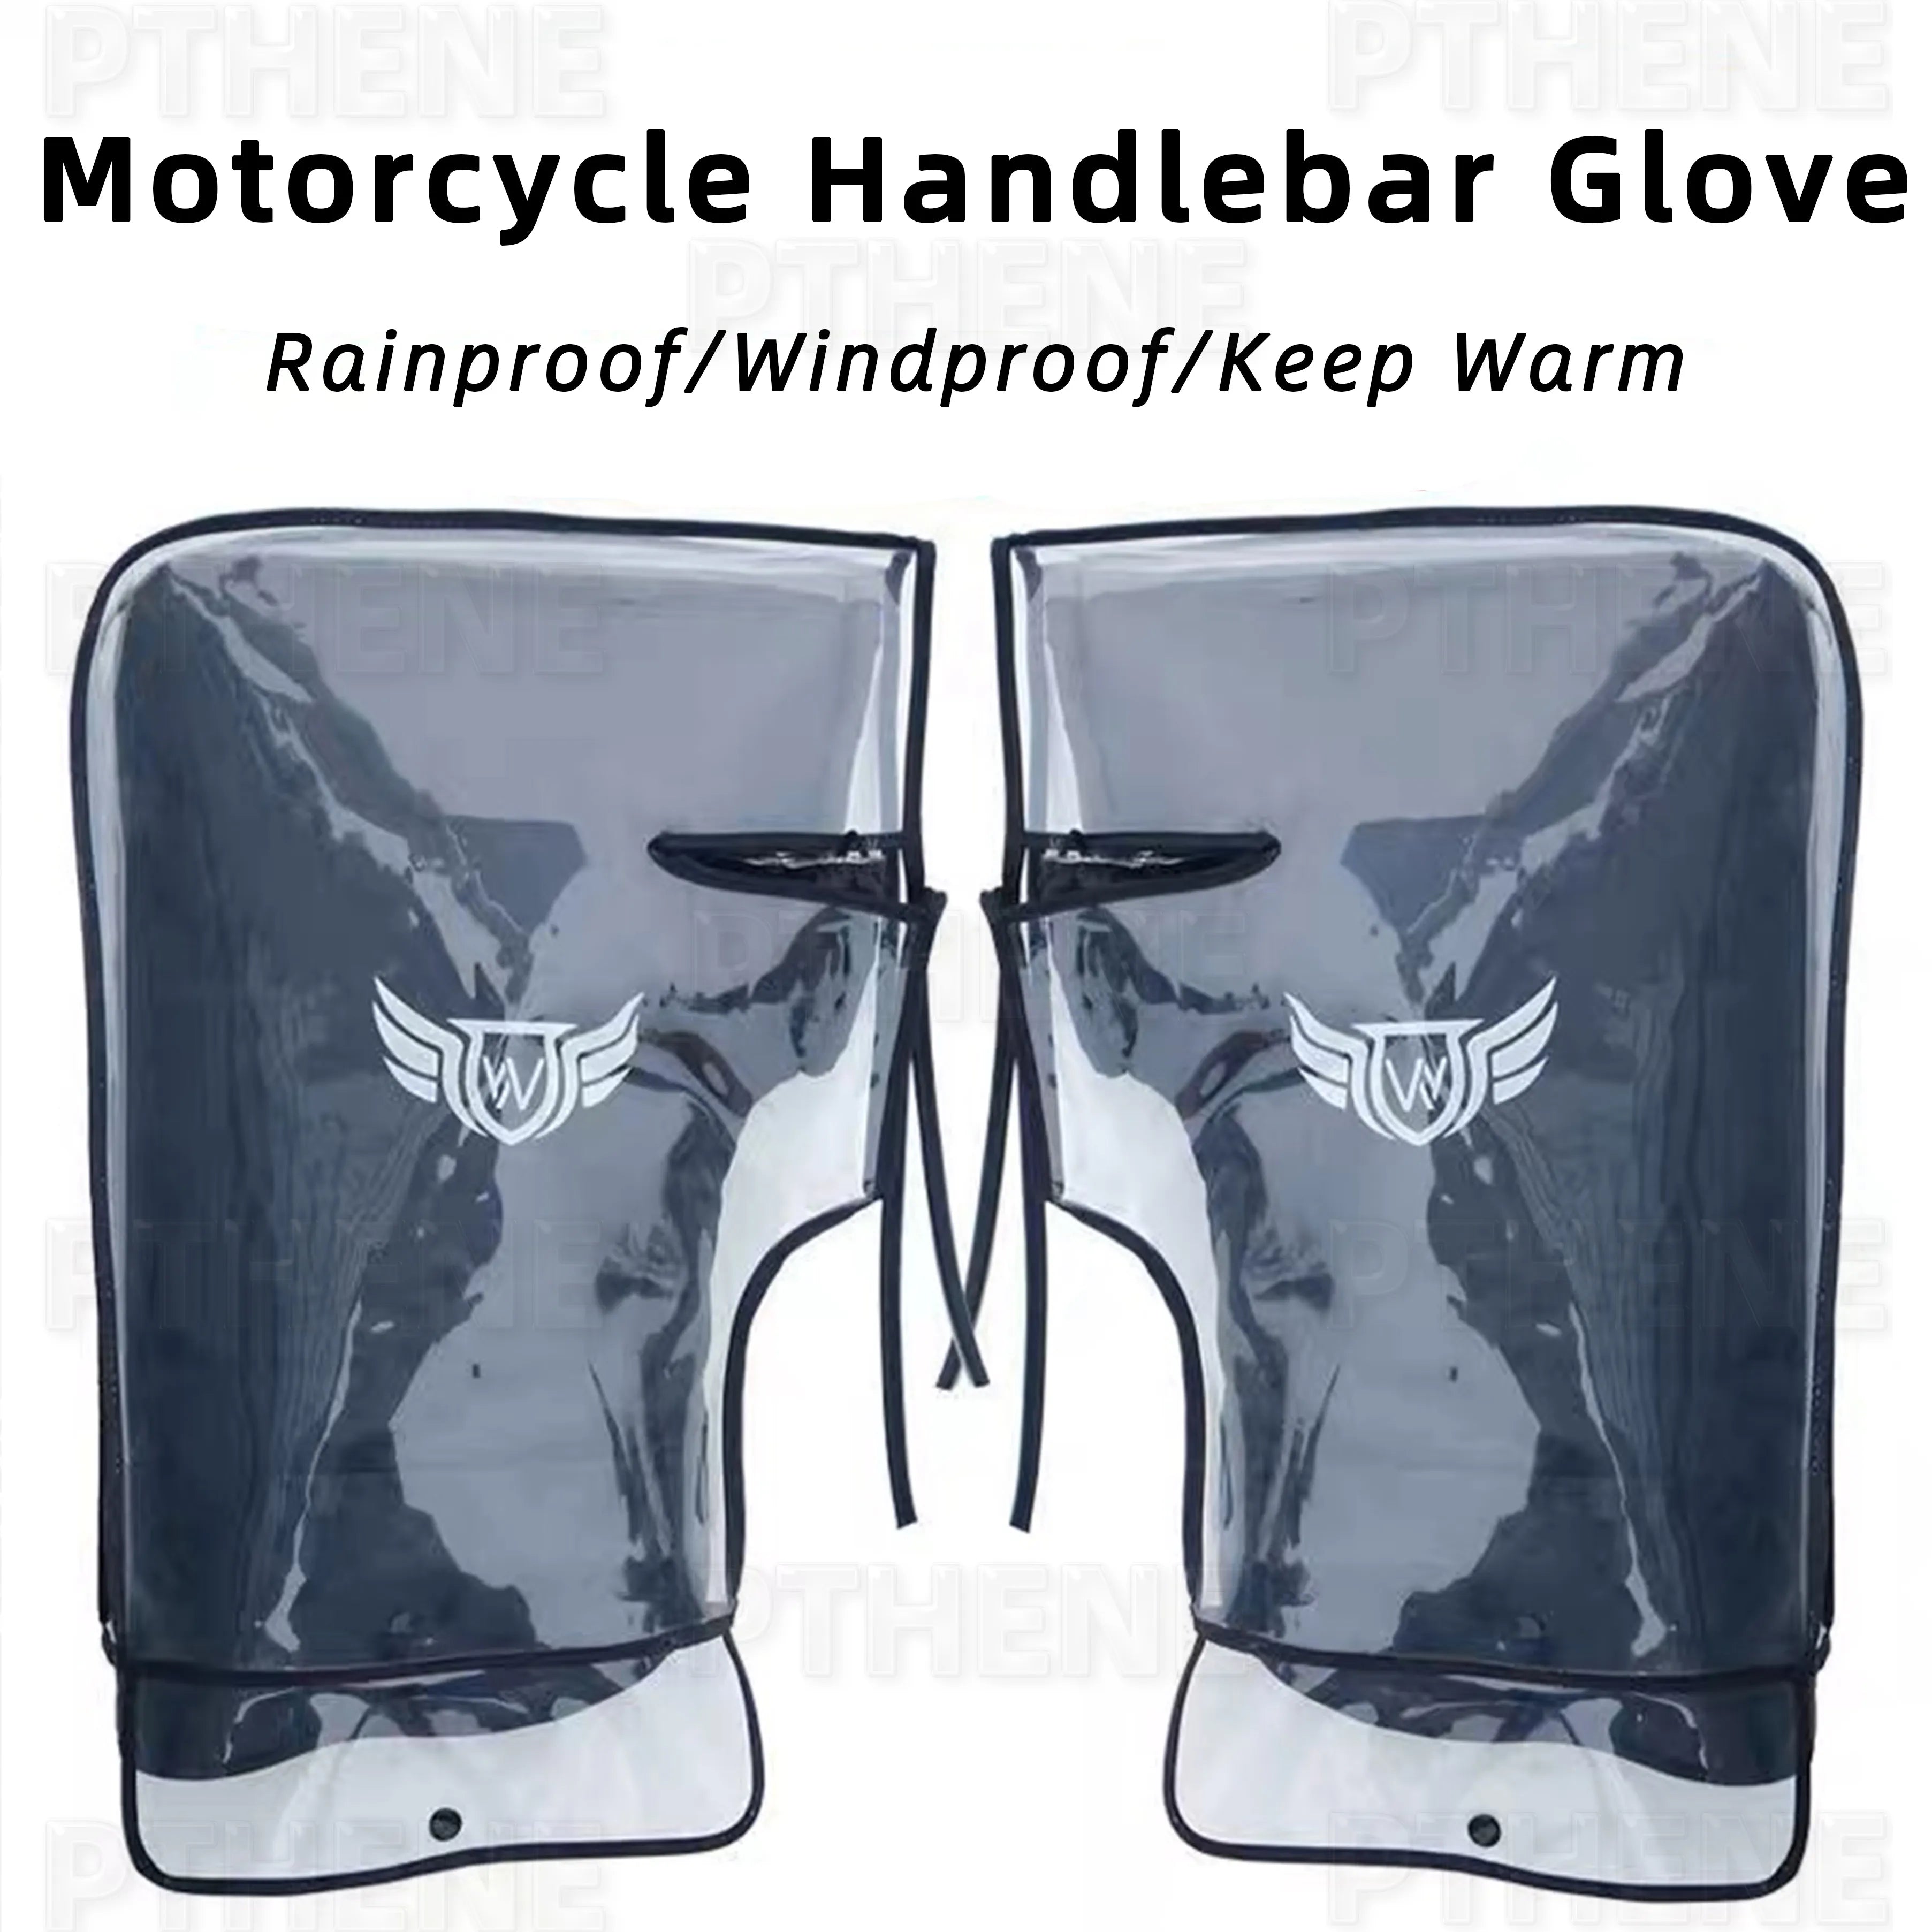 Pthene Motorcycle Scooter Bicycle Windproof Rainproof Winter Keep Warm Hot Protect Handlebar Handle Large Guard Cover Gloves